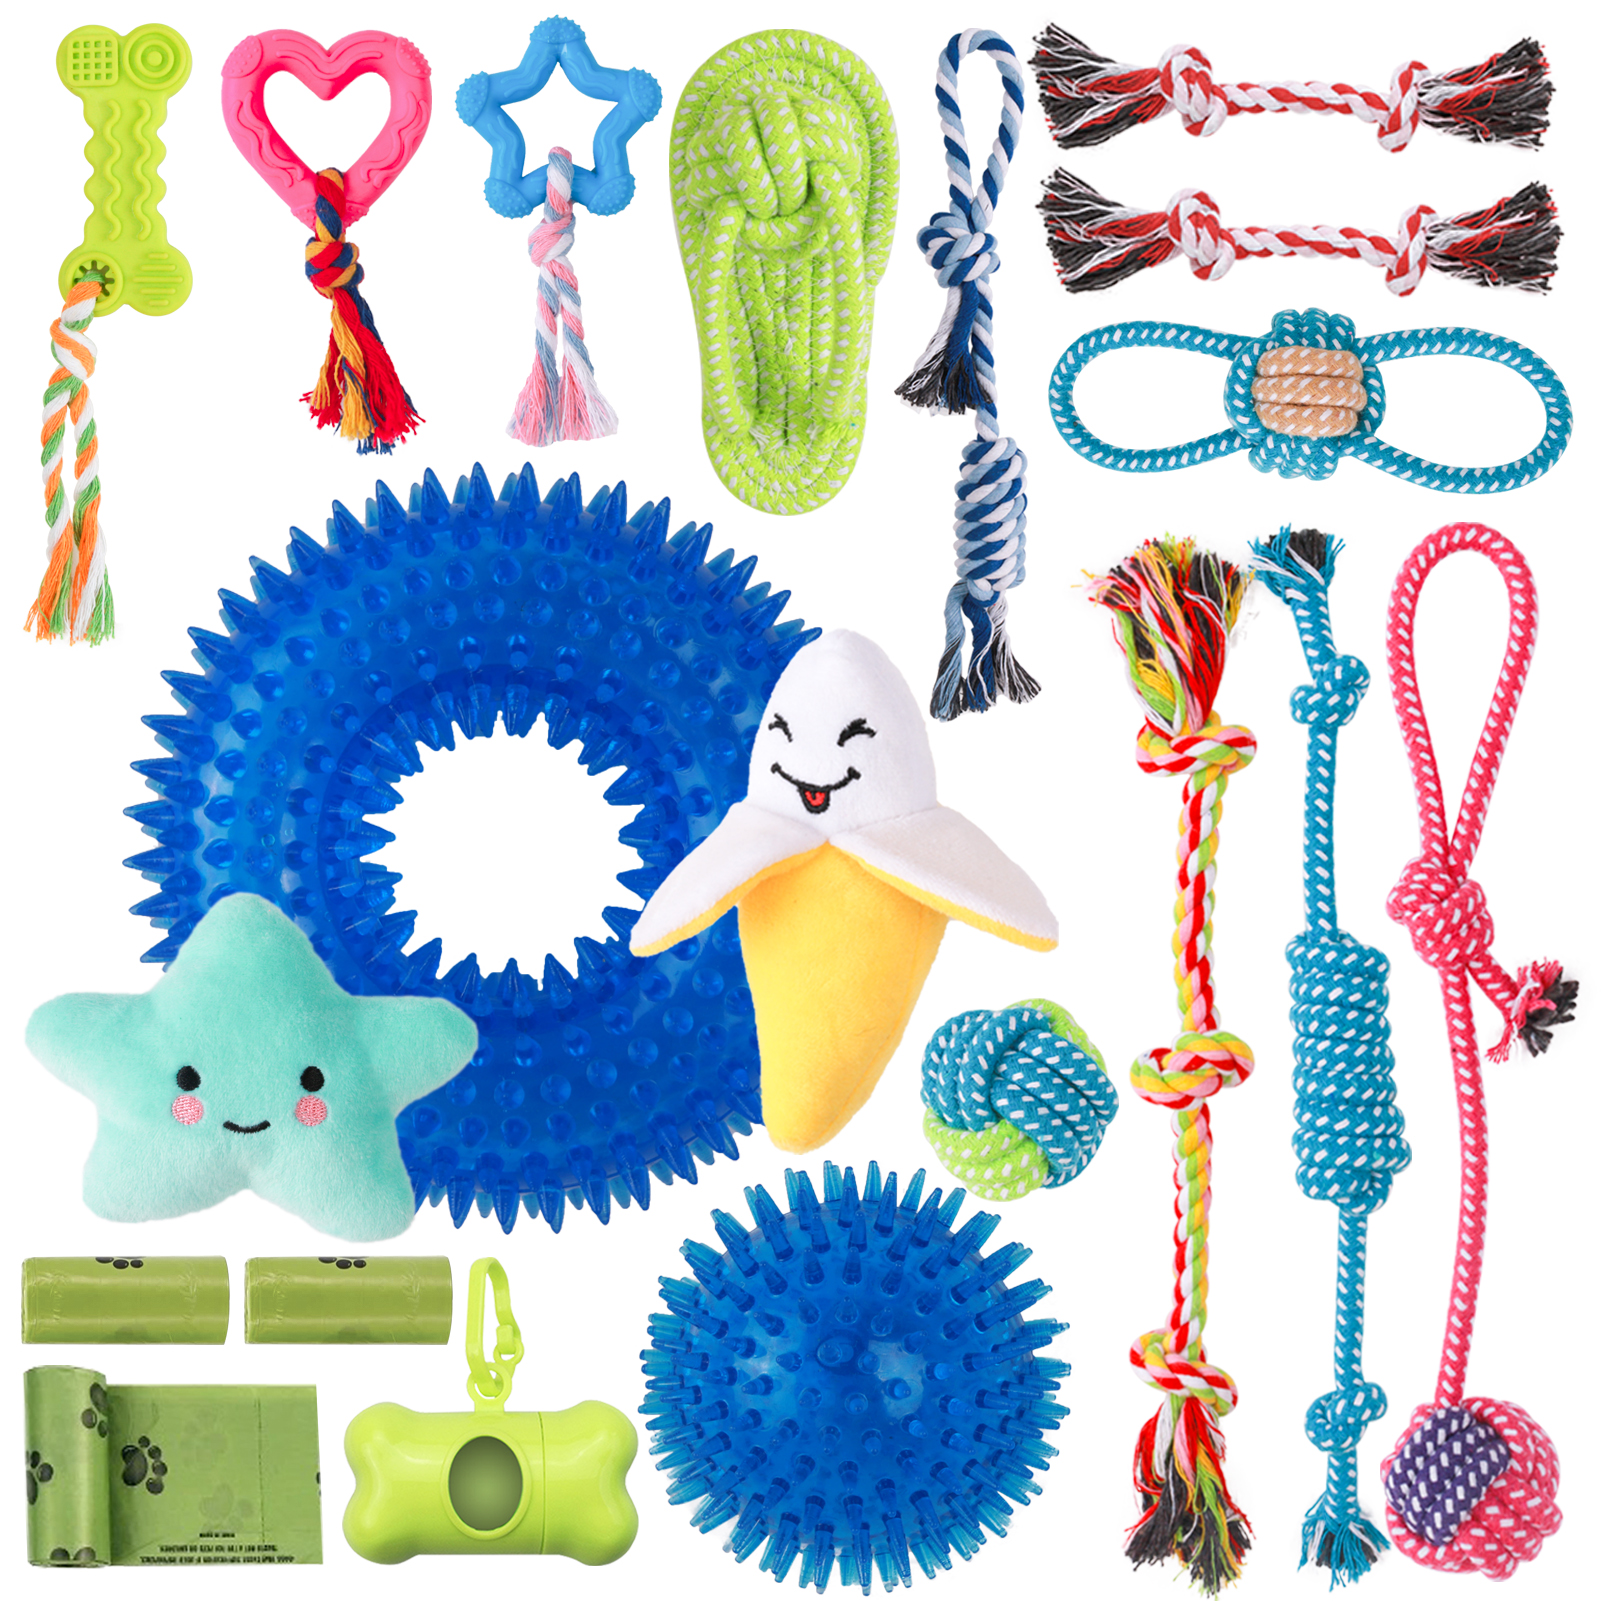 Dog Chew Toys for Puppy - 20 Pack Puppy Teething Chew Toys with Dog Rope Toys,Dog Chew Toys for Aggressive Chewers,Durable Dog Squeaky Toys for Boredom Chew Teething for Small Dogs